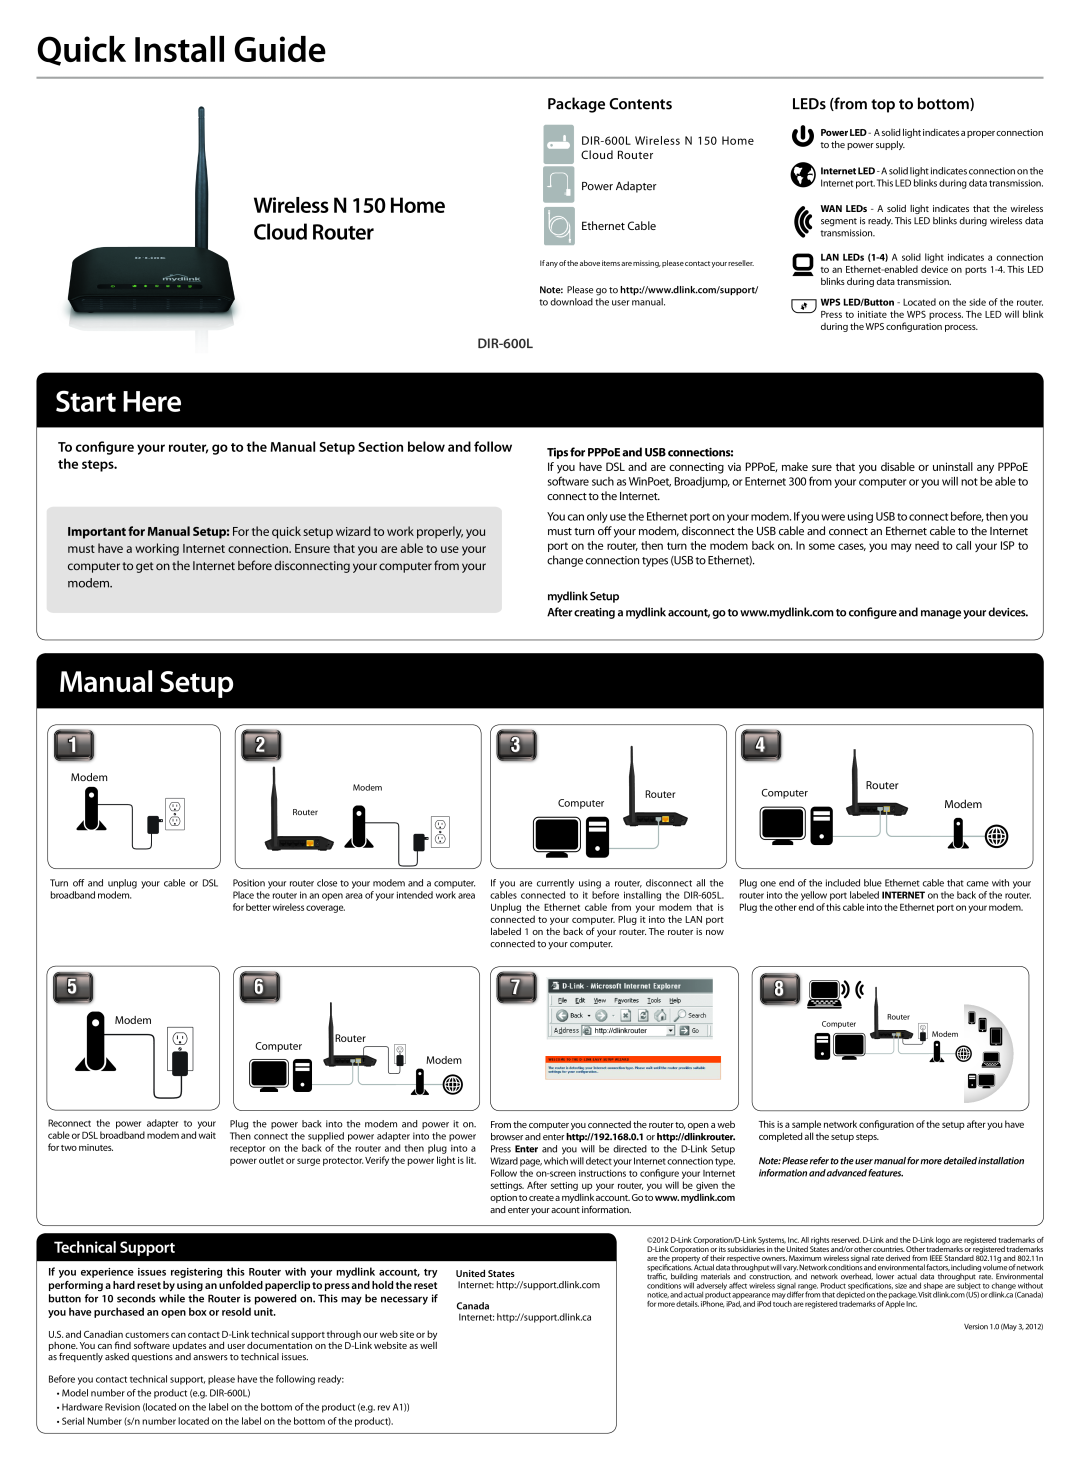 D-Link user manual Quick Install Guide, Start Here, Manual Setup, Wireless N 150 Home Cloud Router, Package Contents 